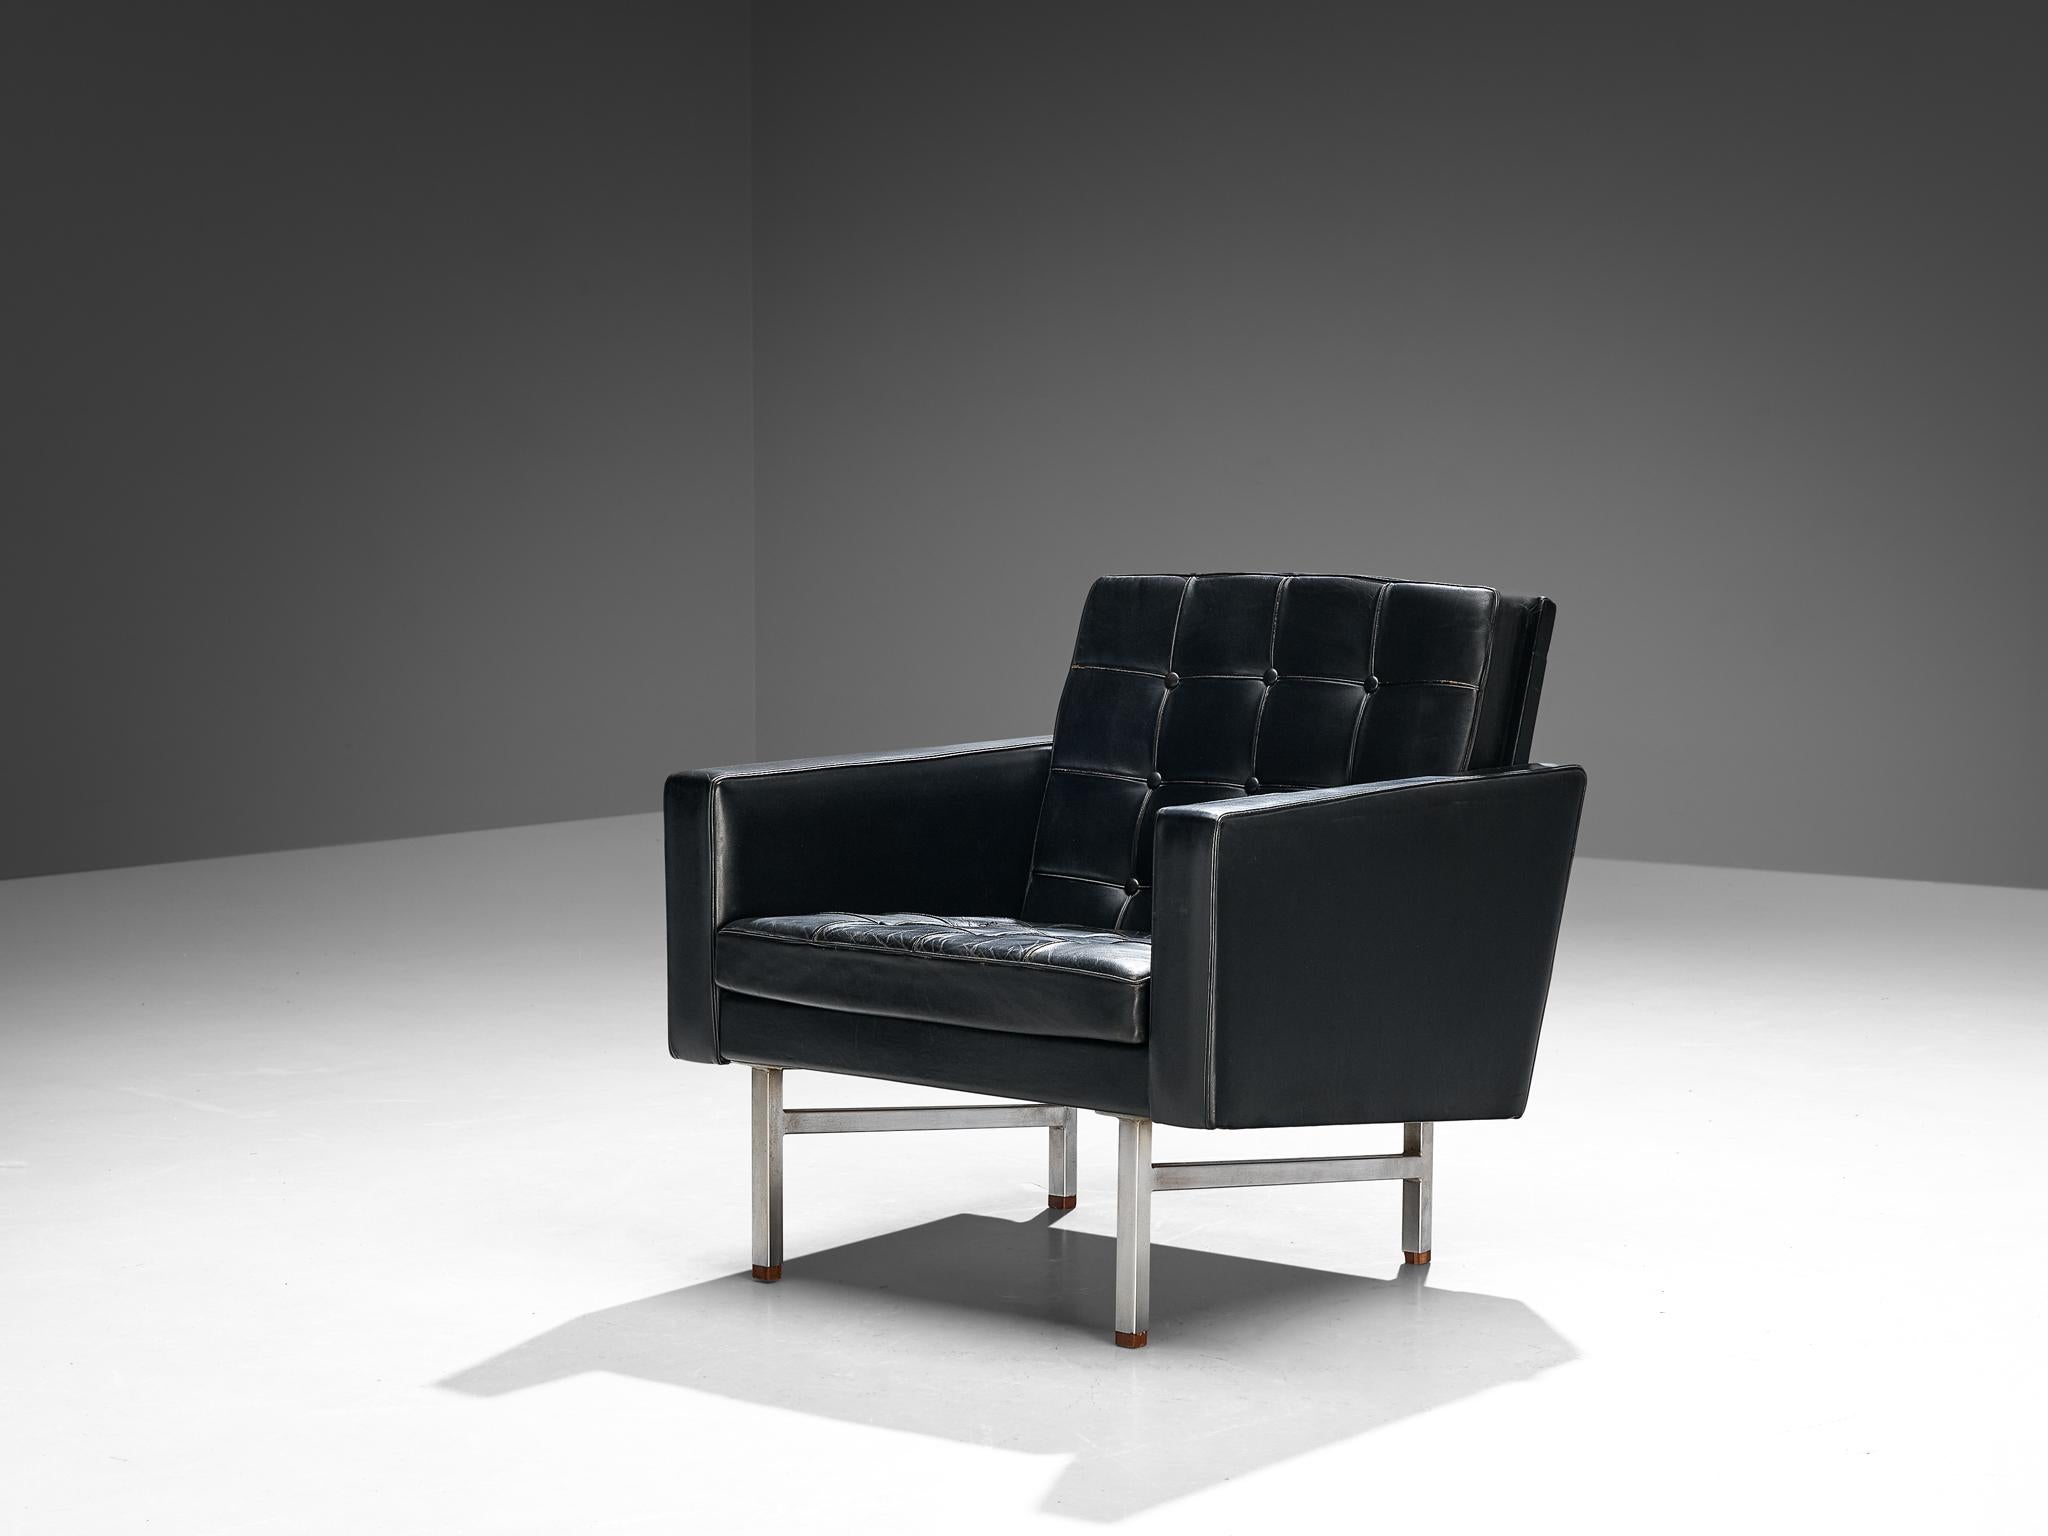 Karl Erik Ekselius, lounge chair, leather, chromed steel, walnut, Sweden, 1960s.

This easy chair is executed in original black leather. The tufted seat and back in combination with the clean and straight corpus and polished steel frame gives the